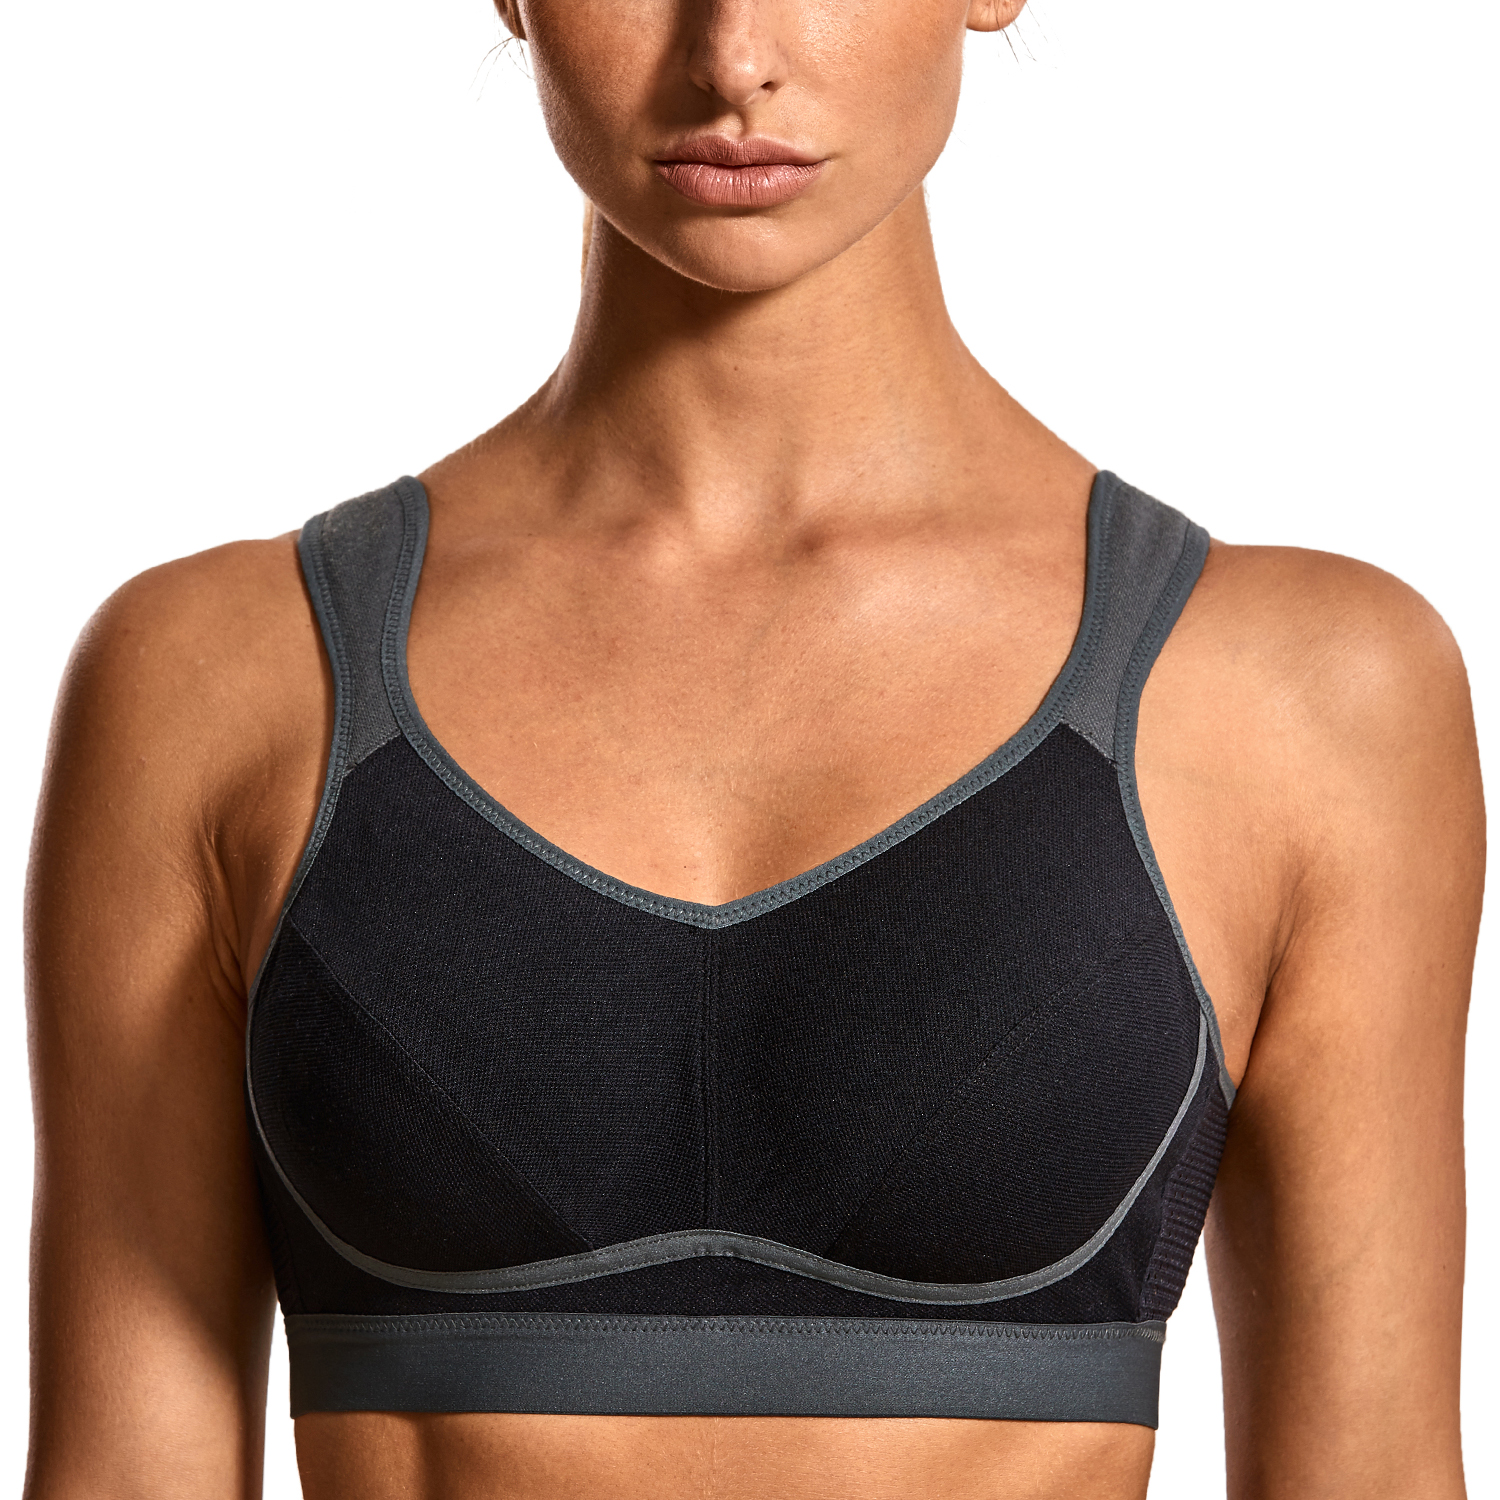 SYROKAN Sports Bra High Impact Support Bra Wirefree Bounce Control Plus Size